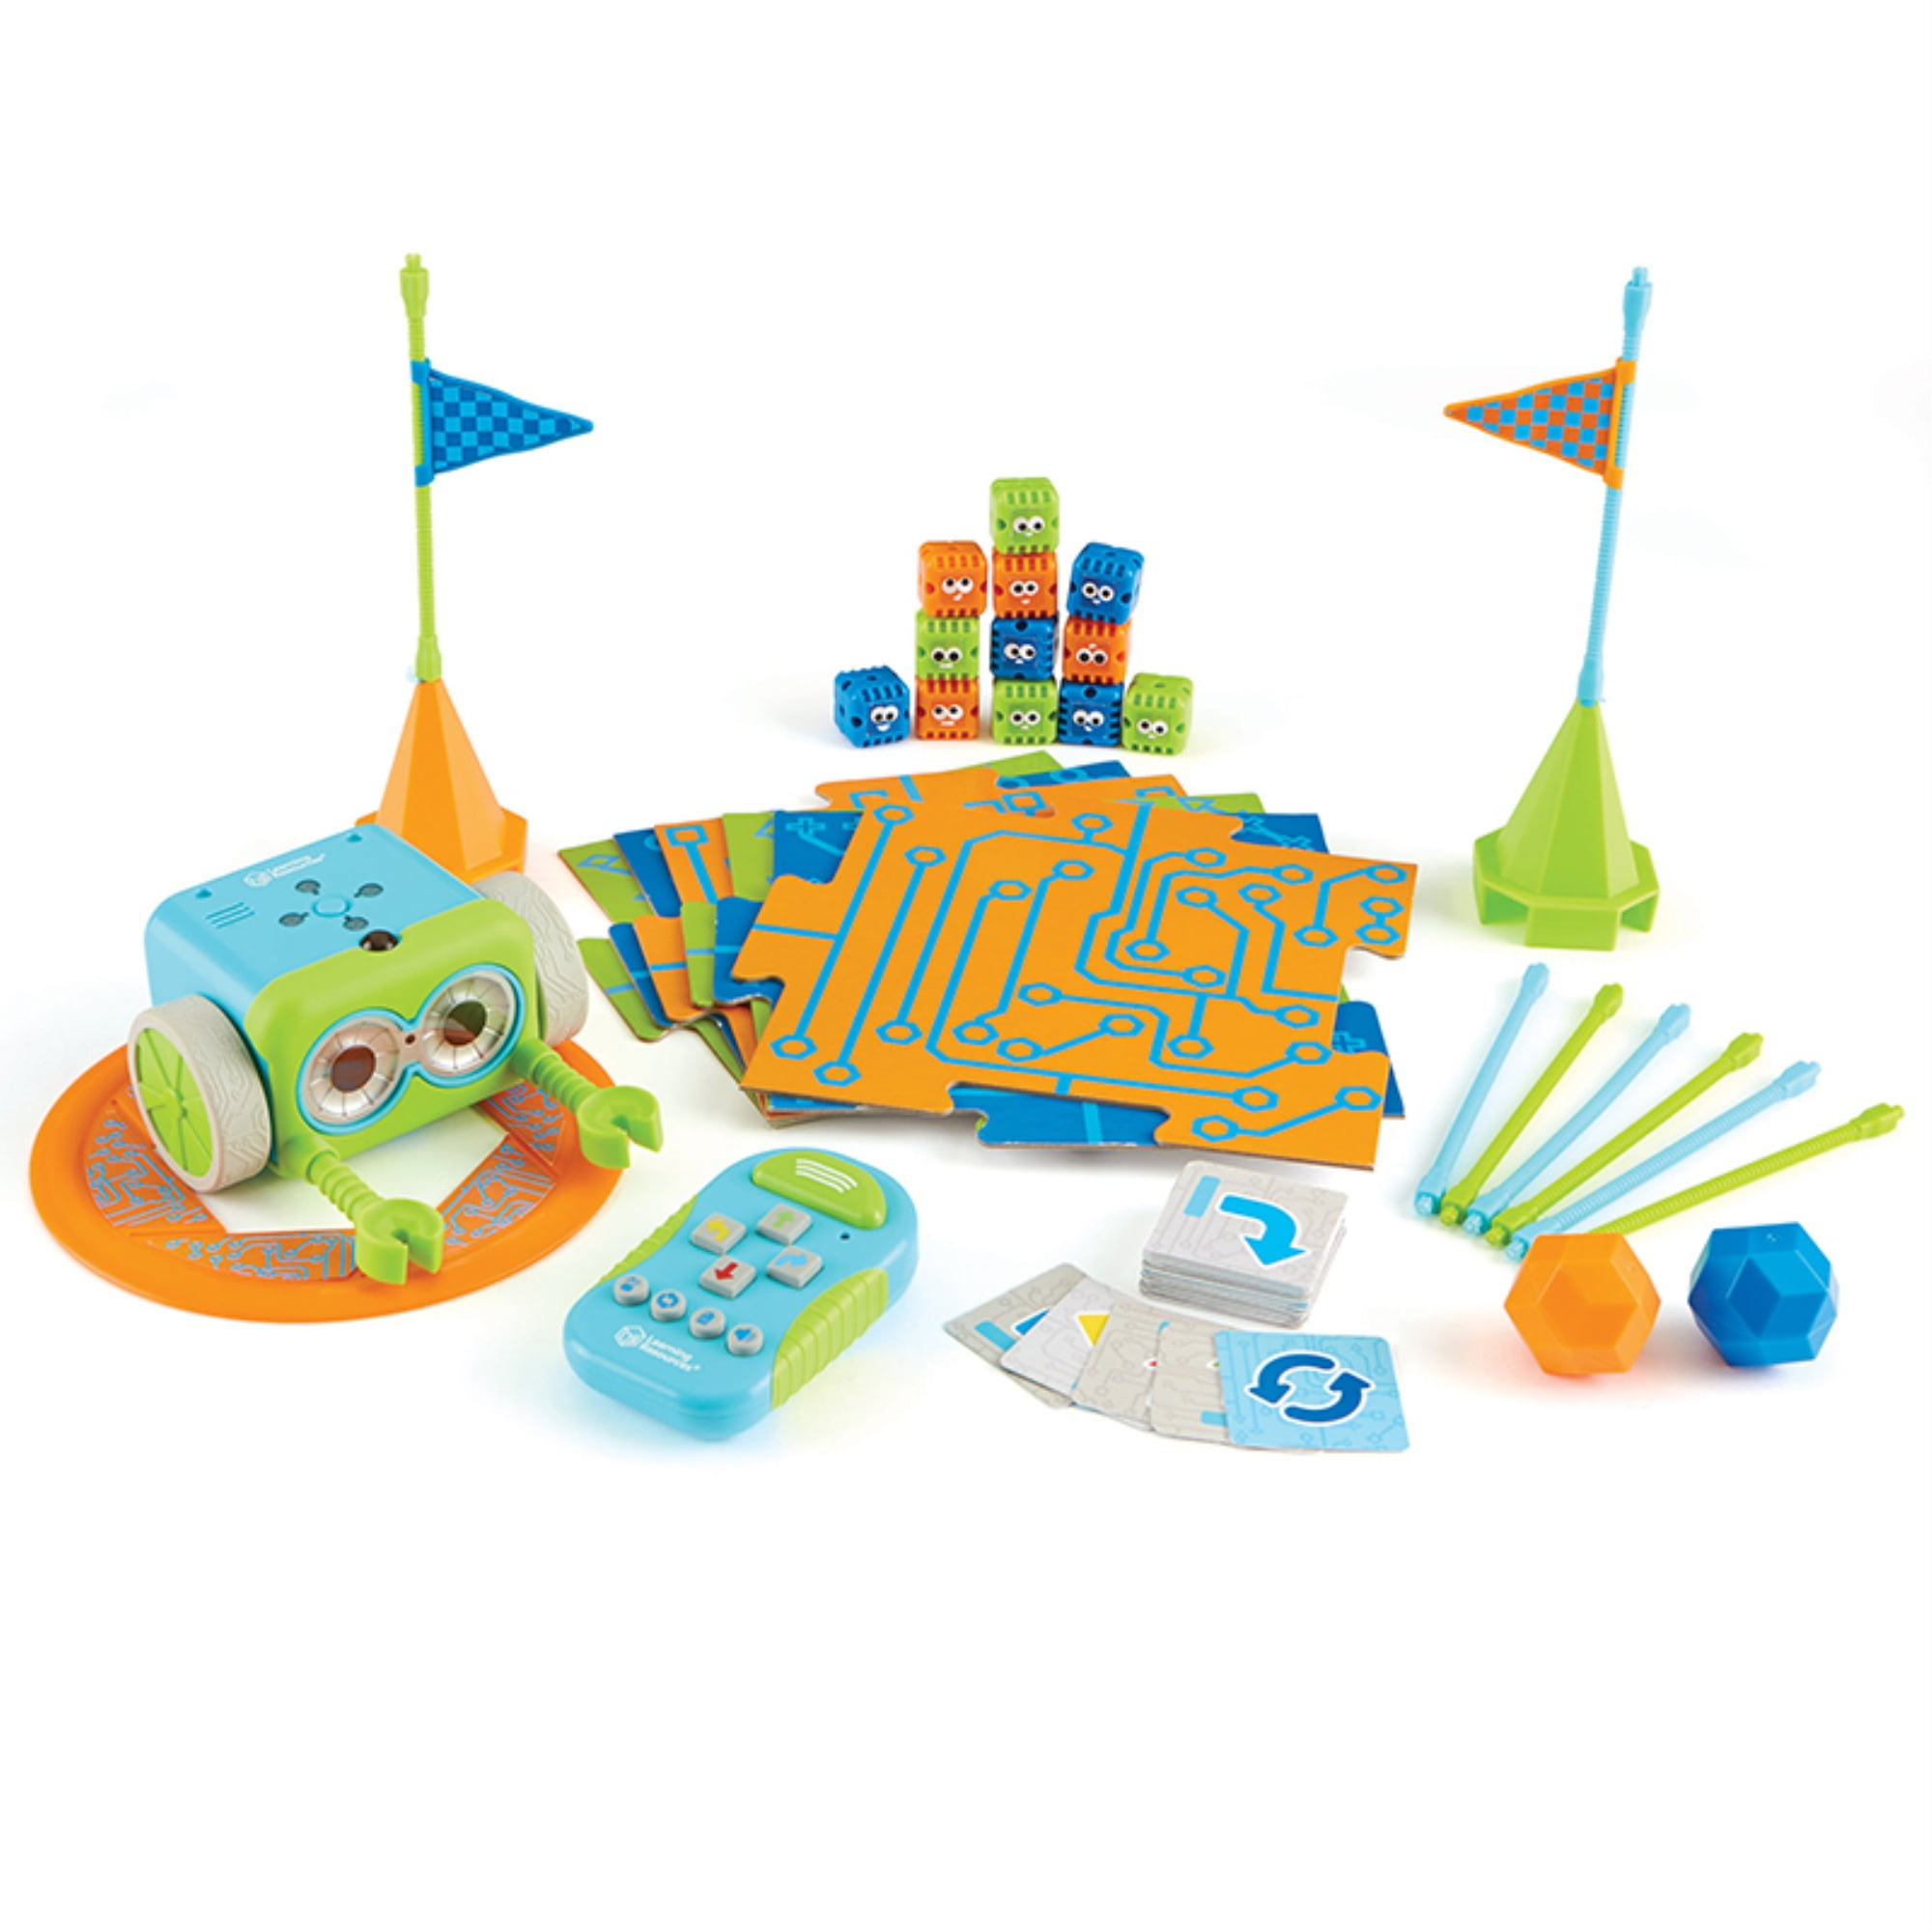 Learning Resources Botley the Coding Robot Activity Set - 77